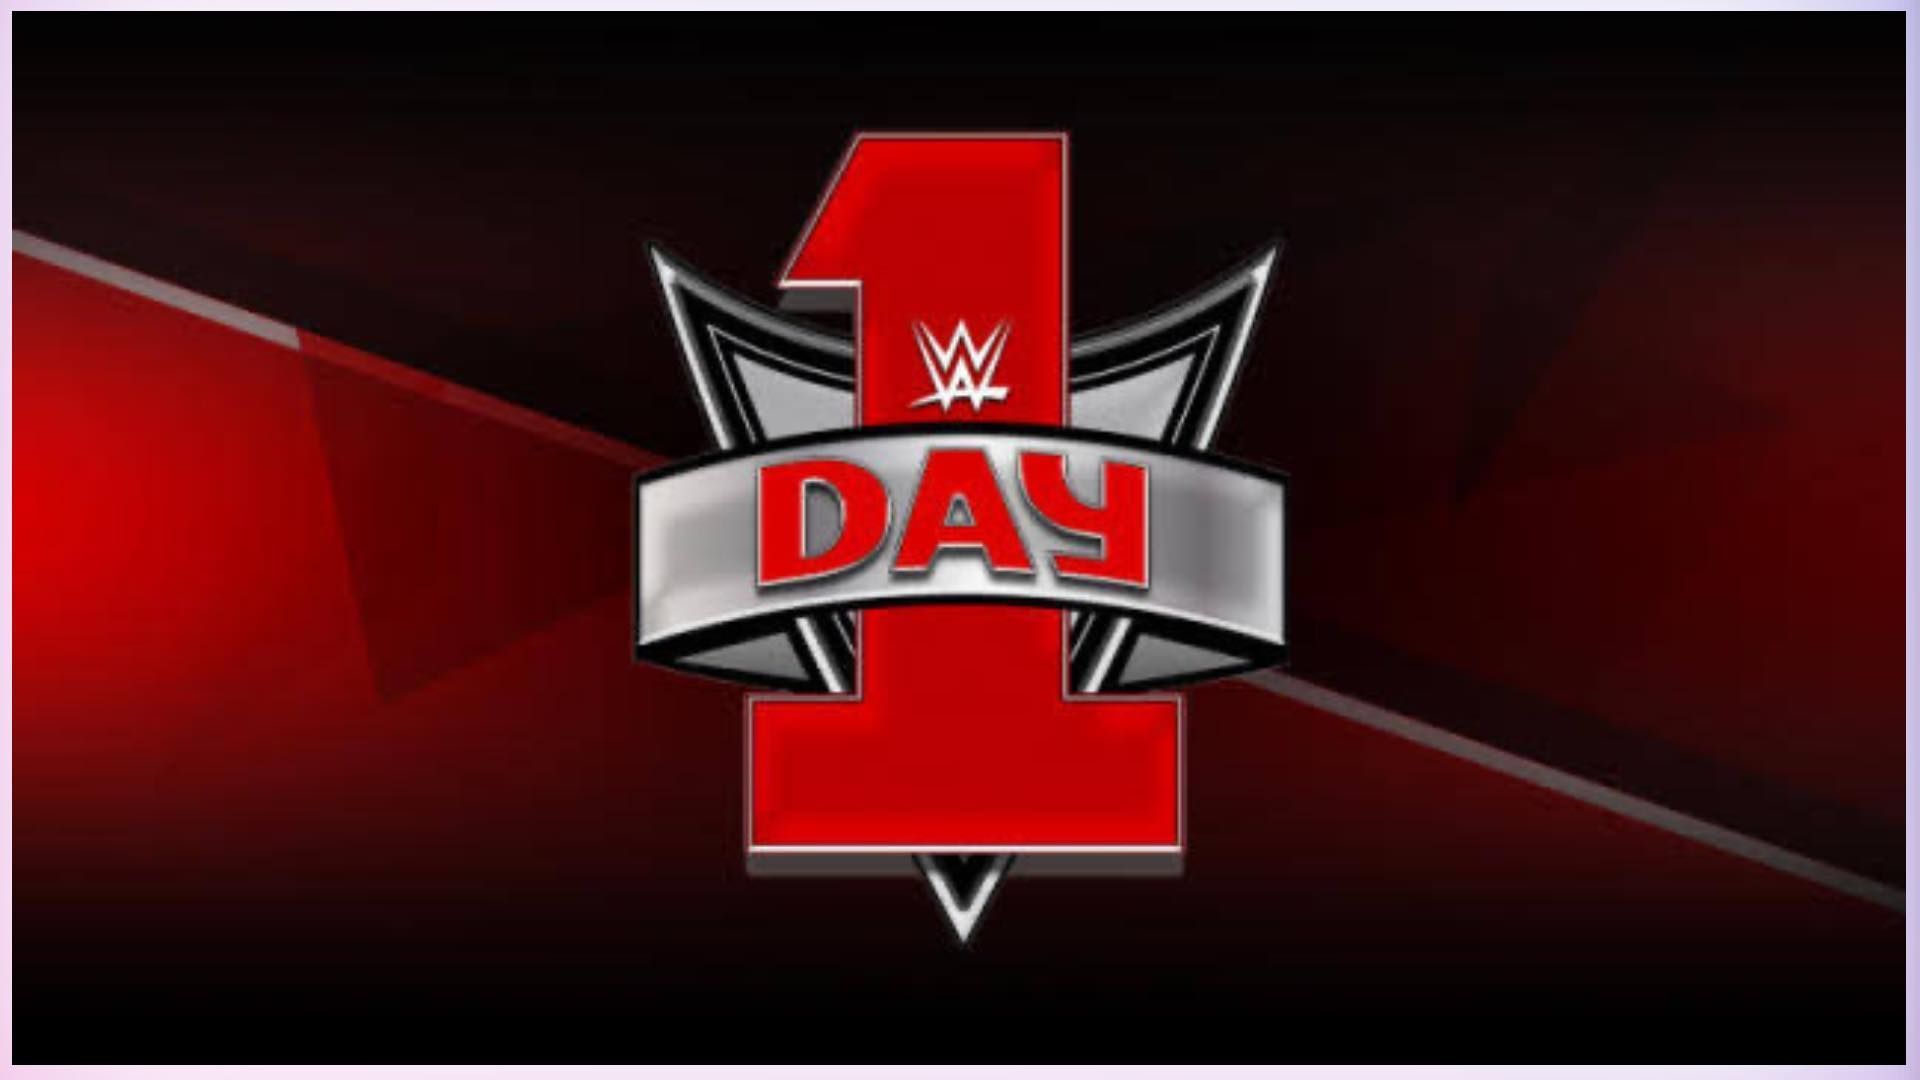 WWE Day 1 takes place two weeks from tonight.